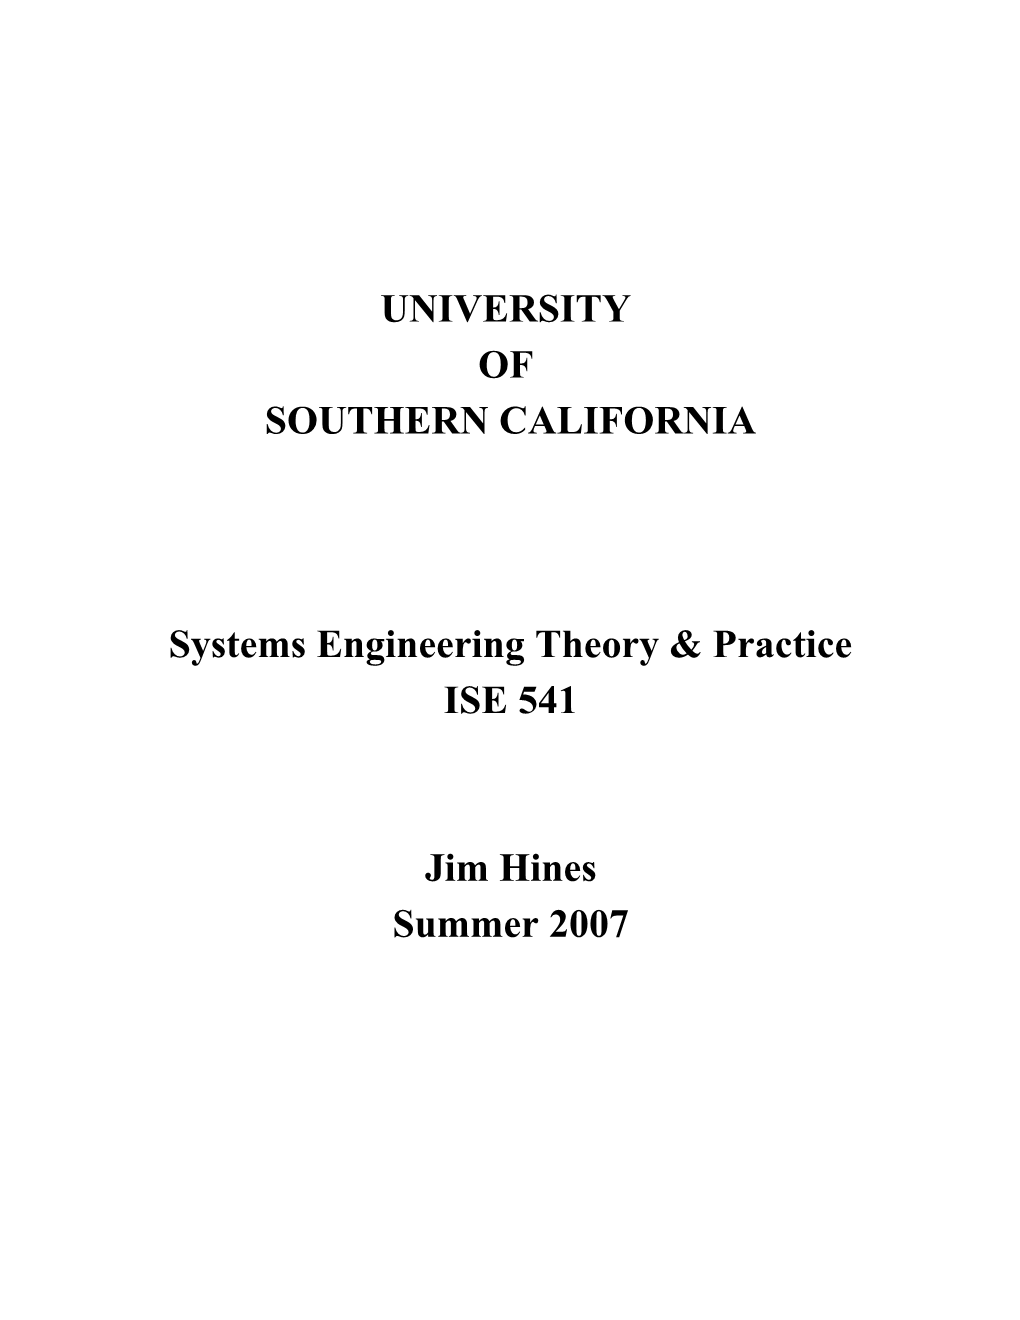 Systems Engineering Theory & Practice